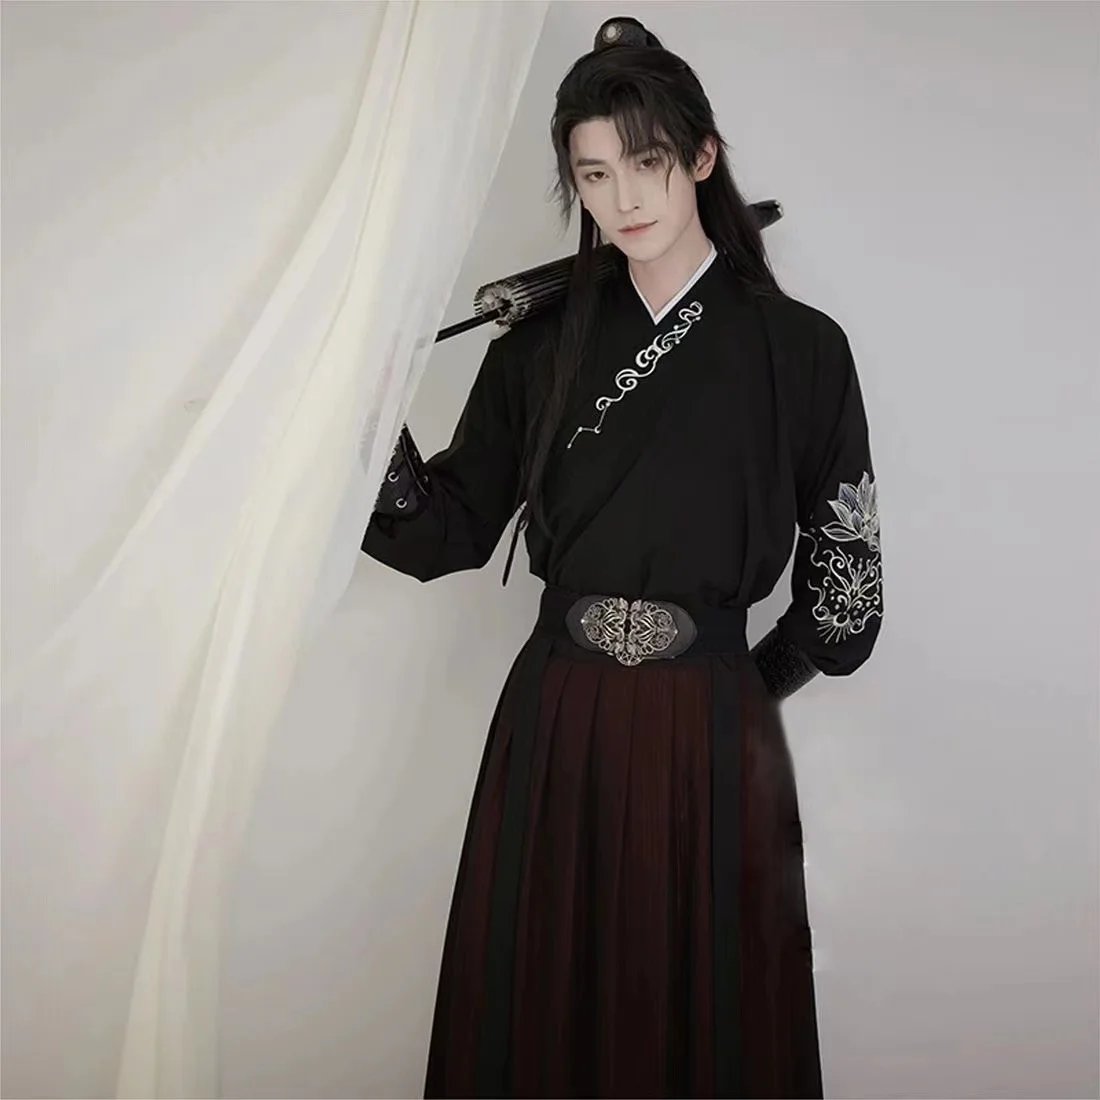 Chinese Style Hanfu Men Ancient Black Costume Hanfu Dress for Boys Girls Young Men Women Photography Cosplay Party Show Clothing sexy shoulderless maternity photo bodysuit for pregnant women photography jumpsuits black summer pregnancy body shooting clothes